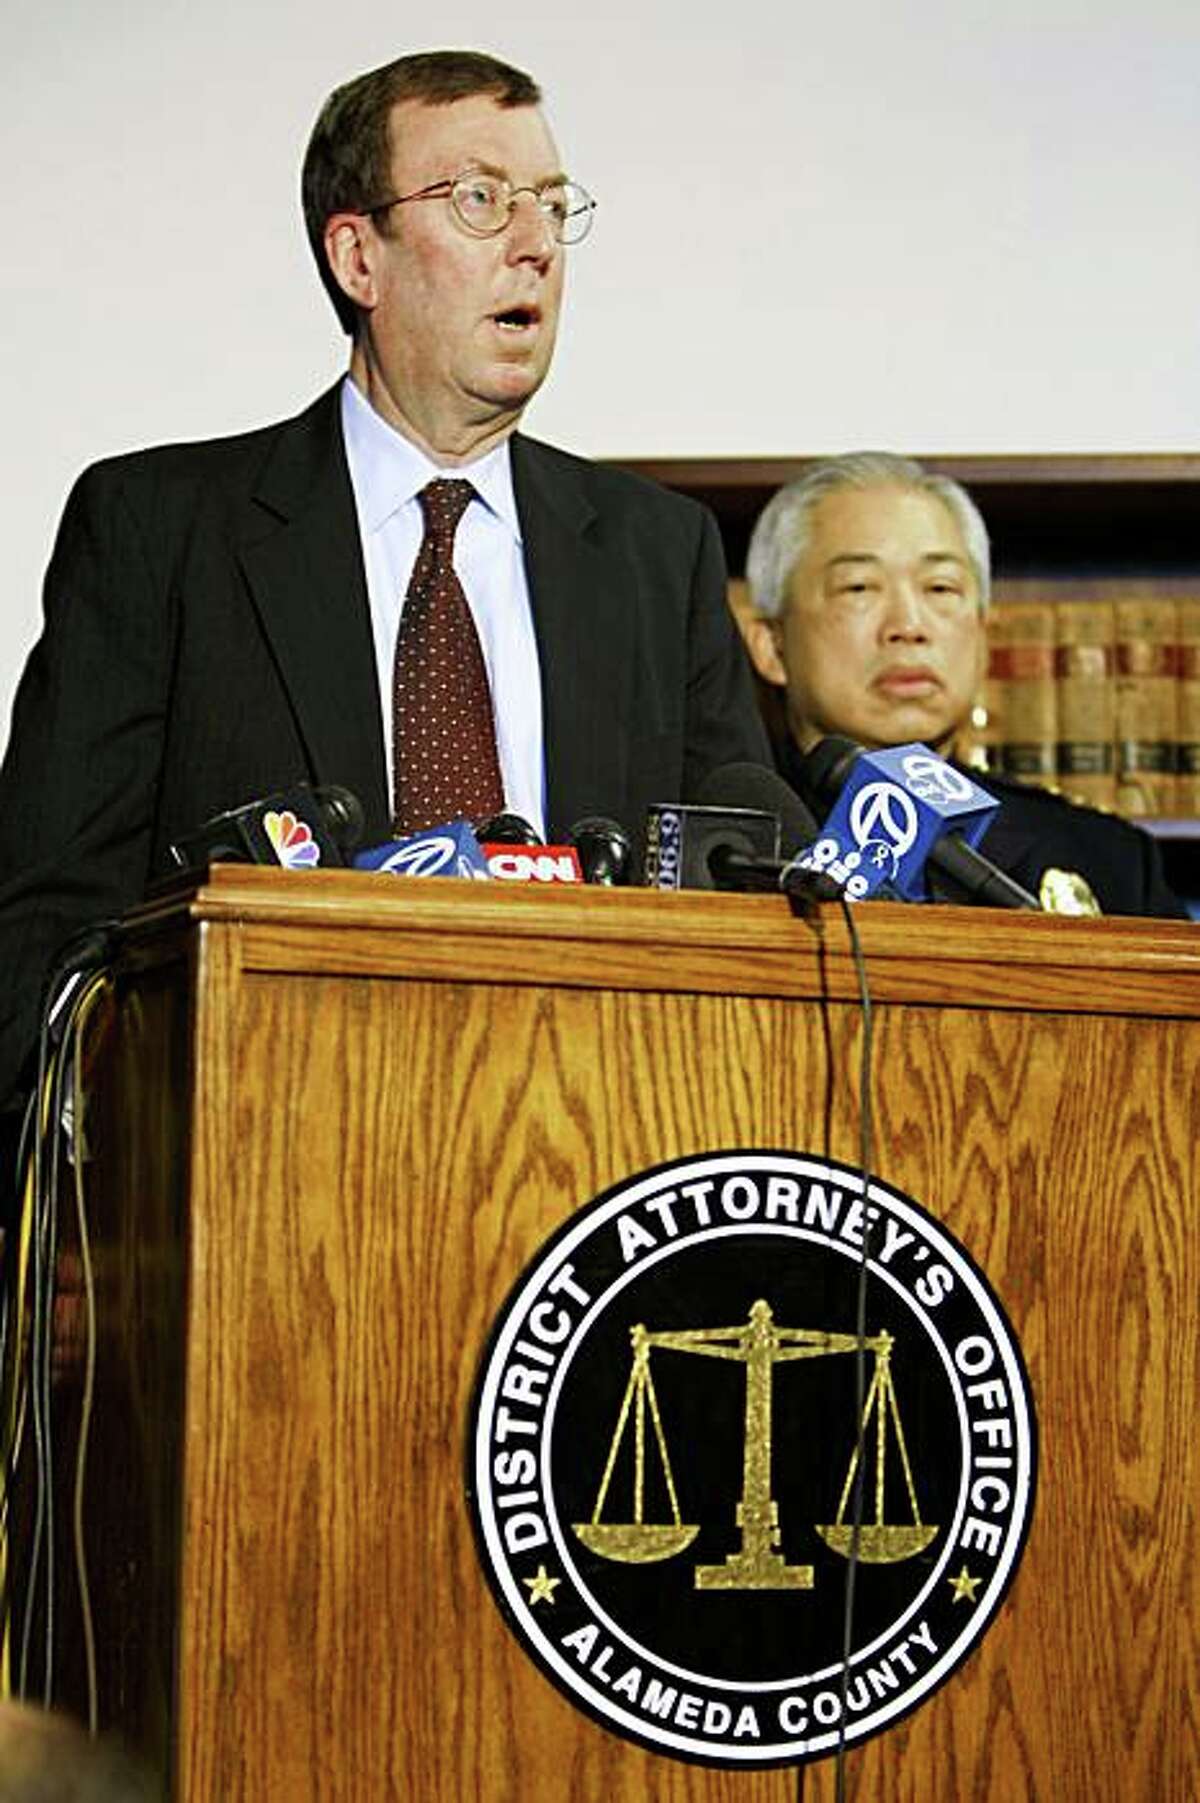 Alameda County District Attorney Tom Orloff left along with Bart Police Chief Gary Gee held a press conference to discuss the arrest of former BART police officer Johannes Mehserle in Minden Nevada yesterday. Mehserle is charged with second-degree murder in the shooting death of Oscar Grant III at the Fruitvale BART station in Oakland on Jan. 1. Wednesday Jan 14, 2009